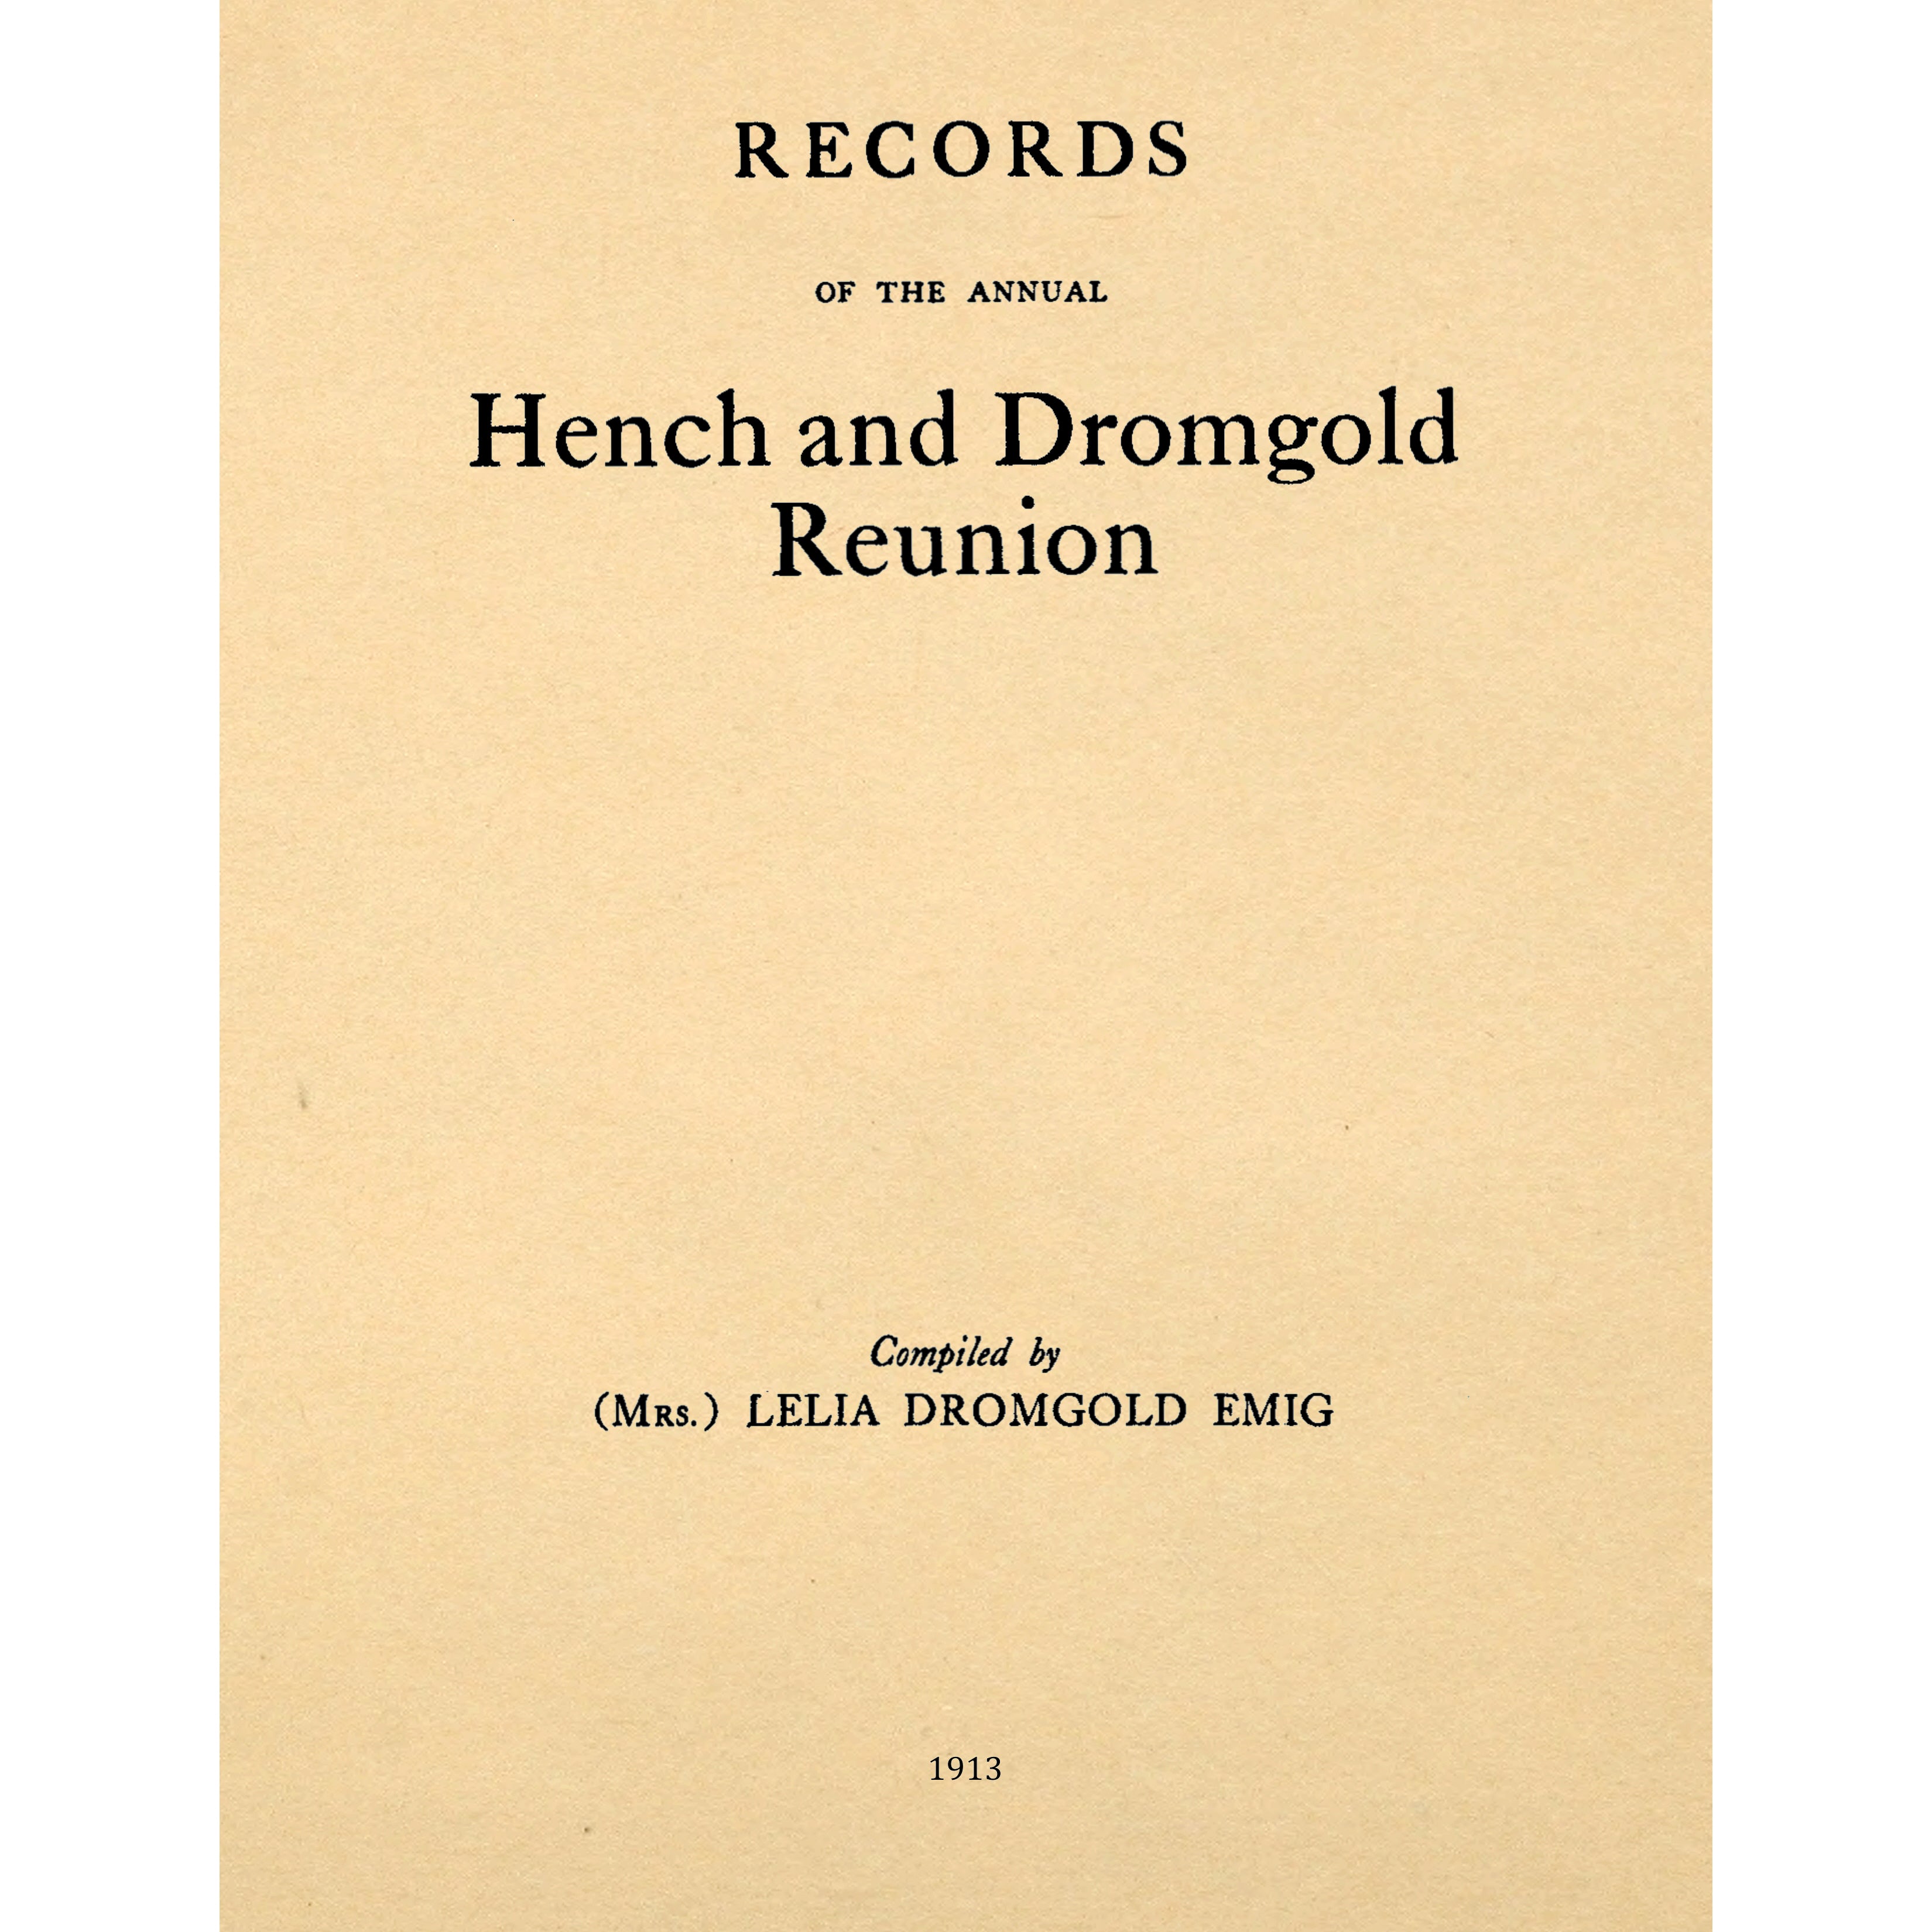 Records of the Hench and Drumgold Reunion Held in Perry County, PA From 1897 to 1912;